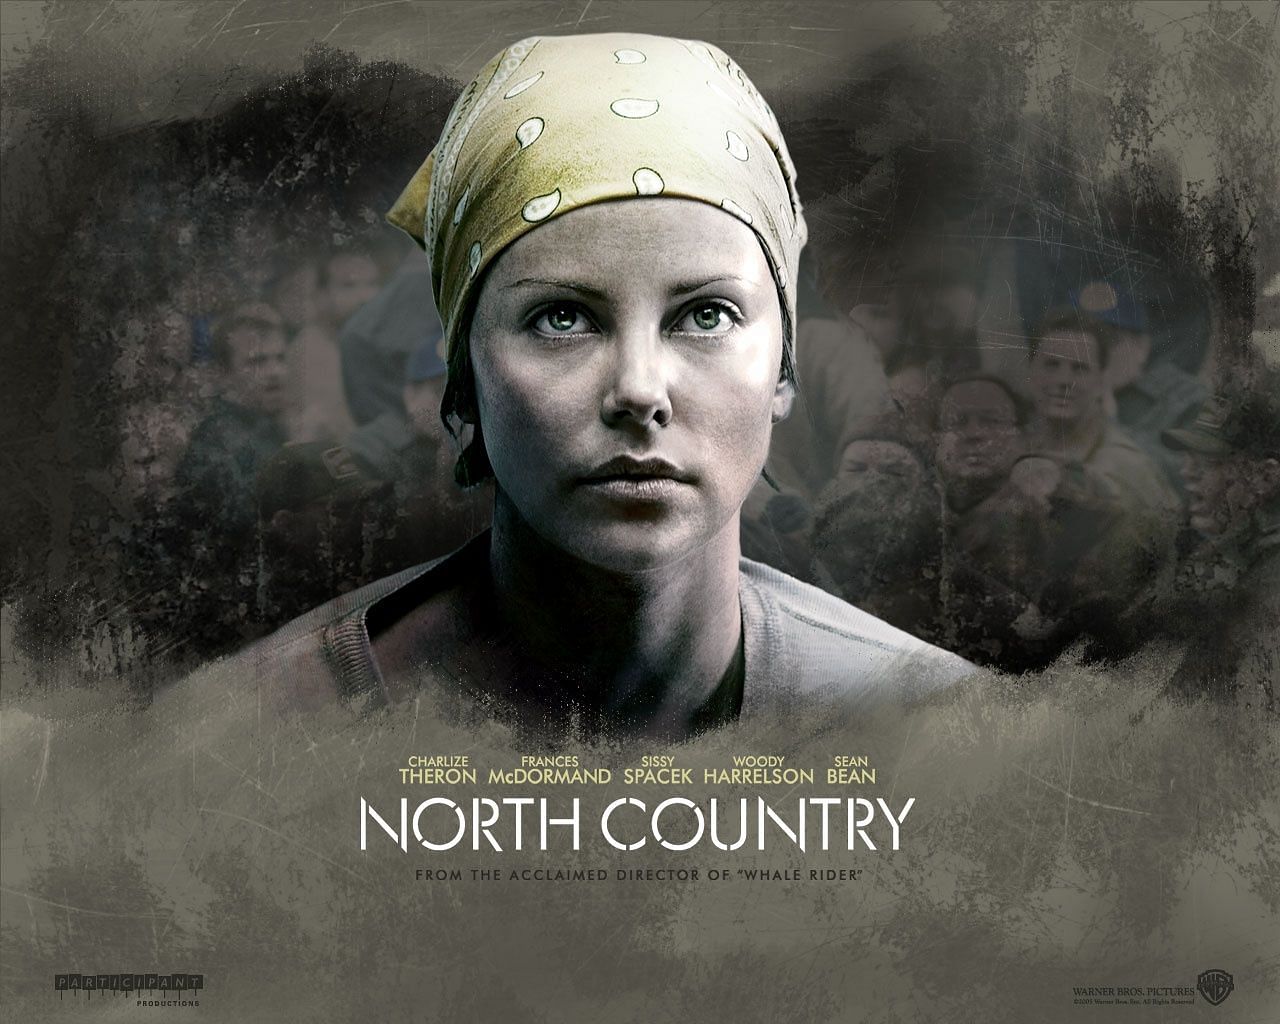 North Country (Image via Warner Bros. Pictures)